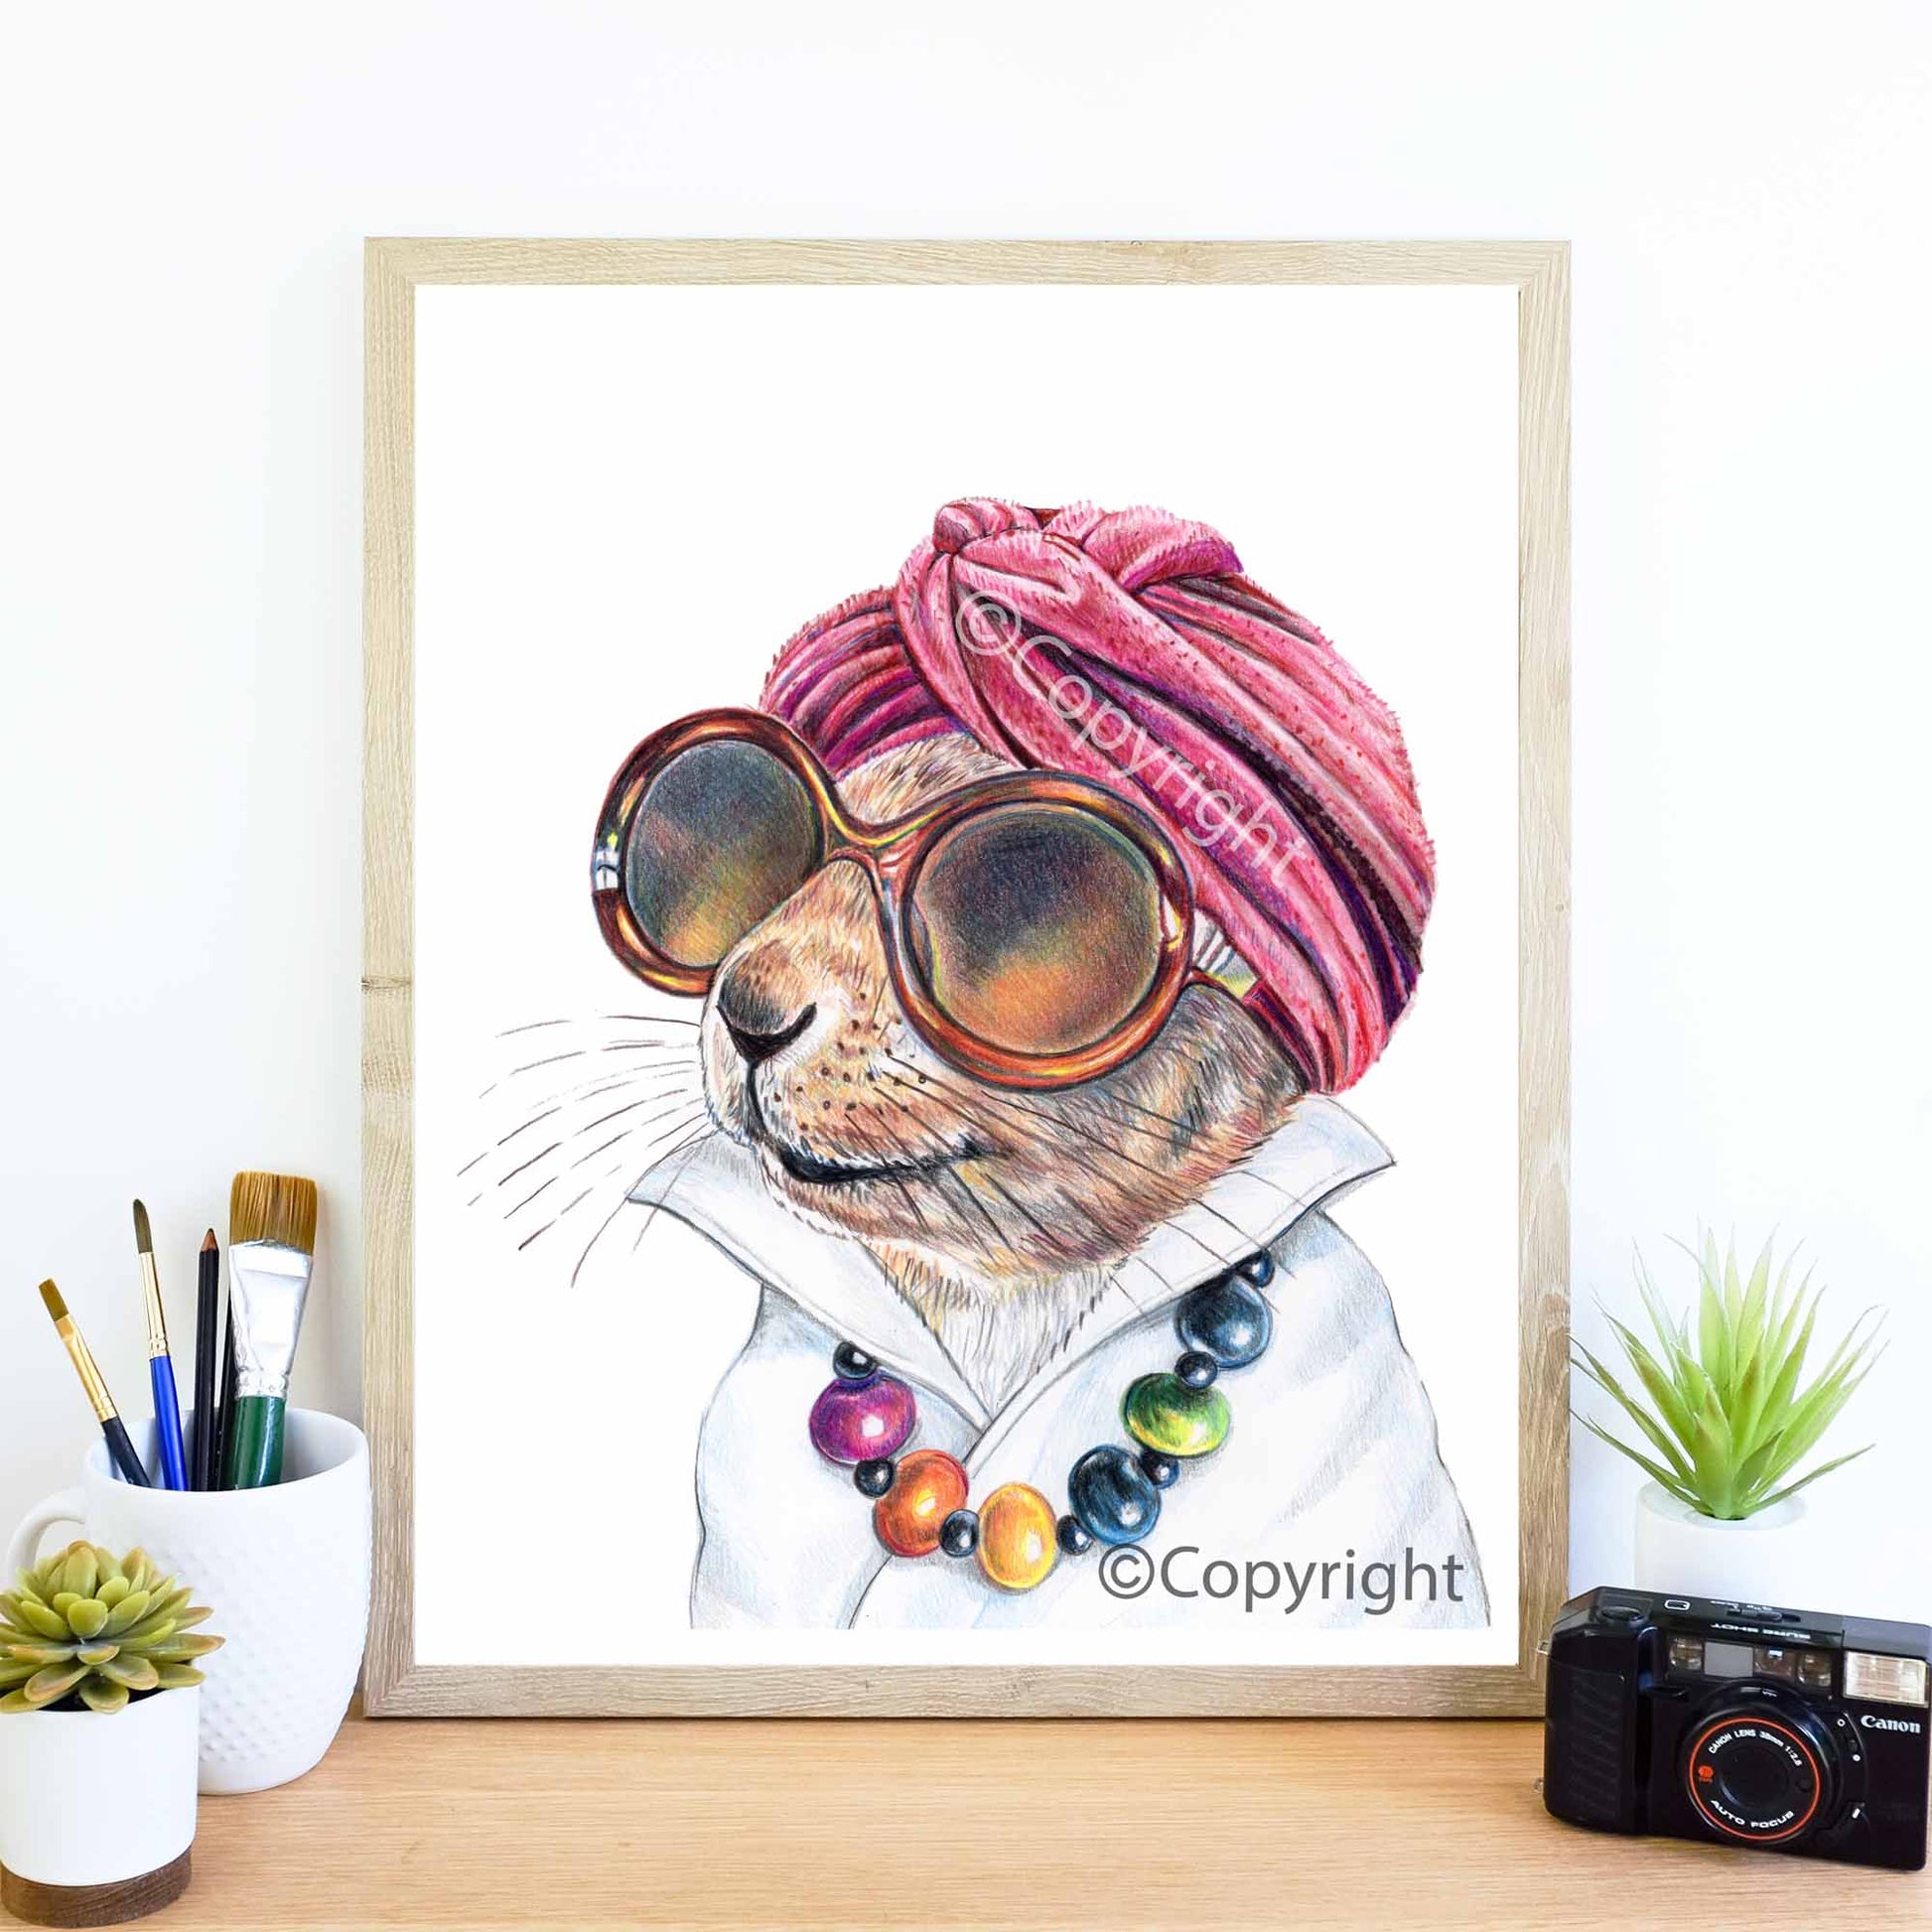 Coloured pencil drawing of a squirrel wearing vintage sunglass, turban and necklace. She's a diva! Art by Deidre Wicks